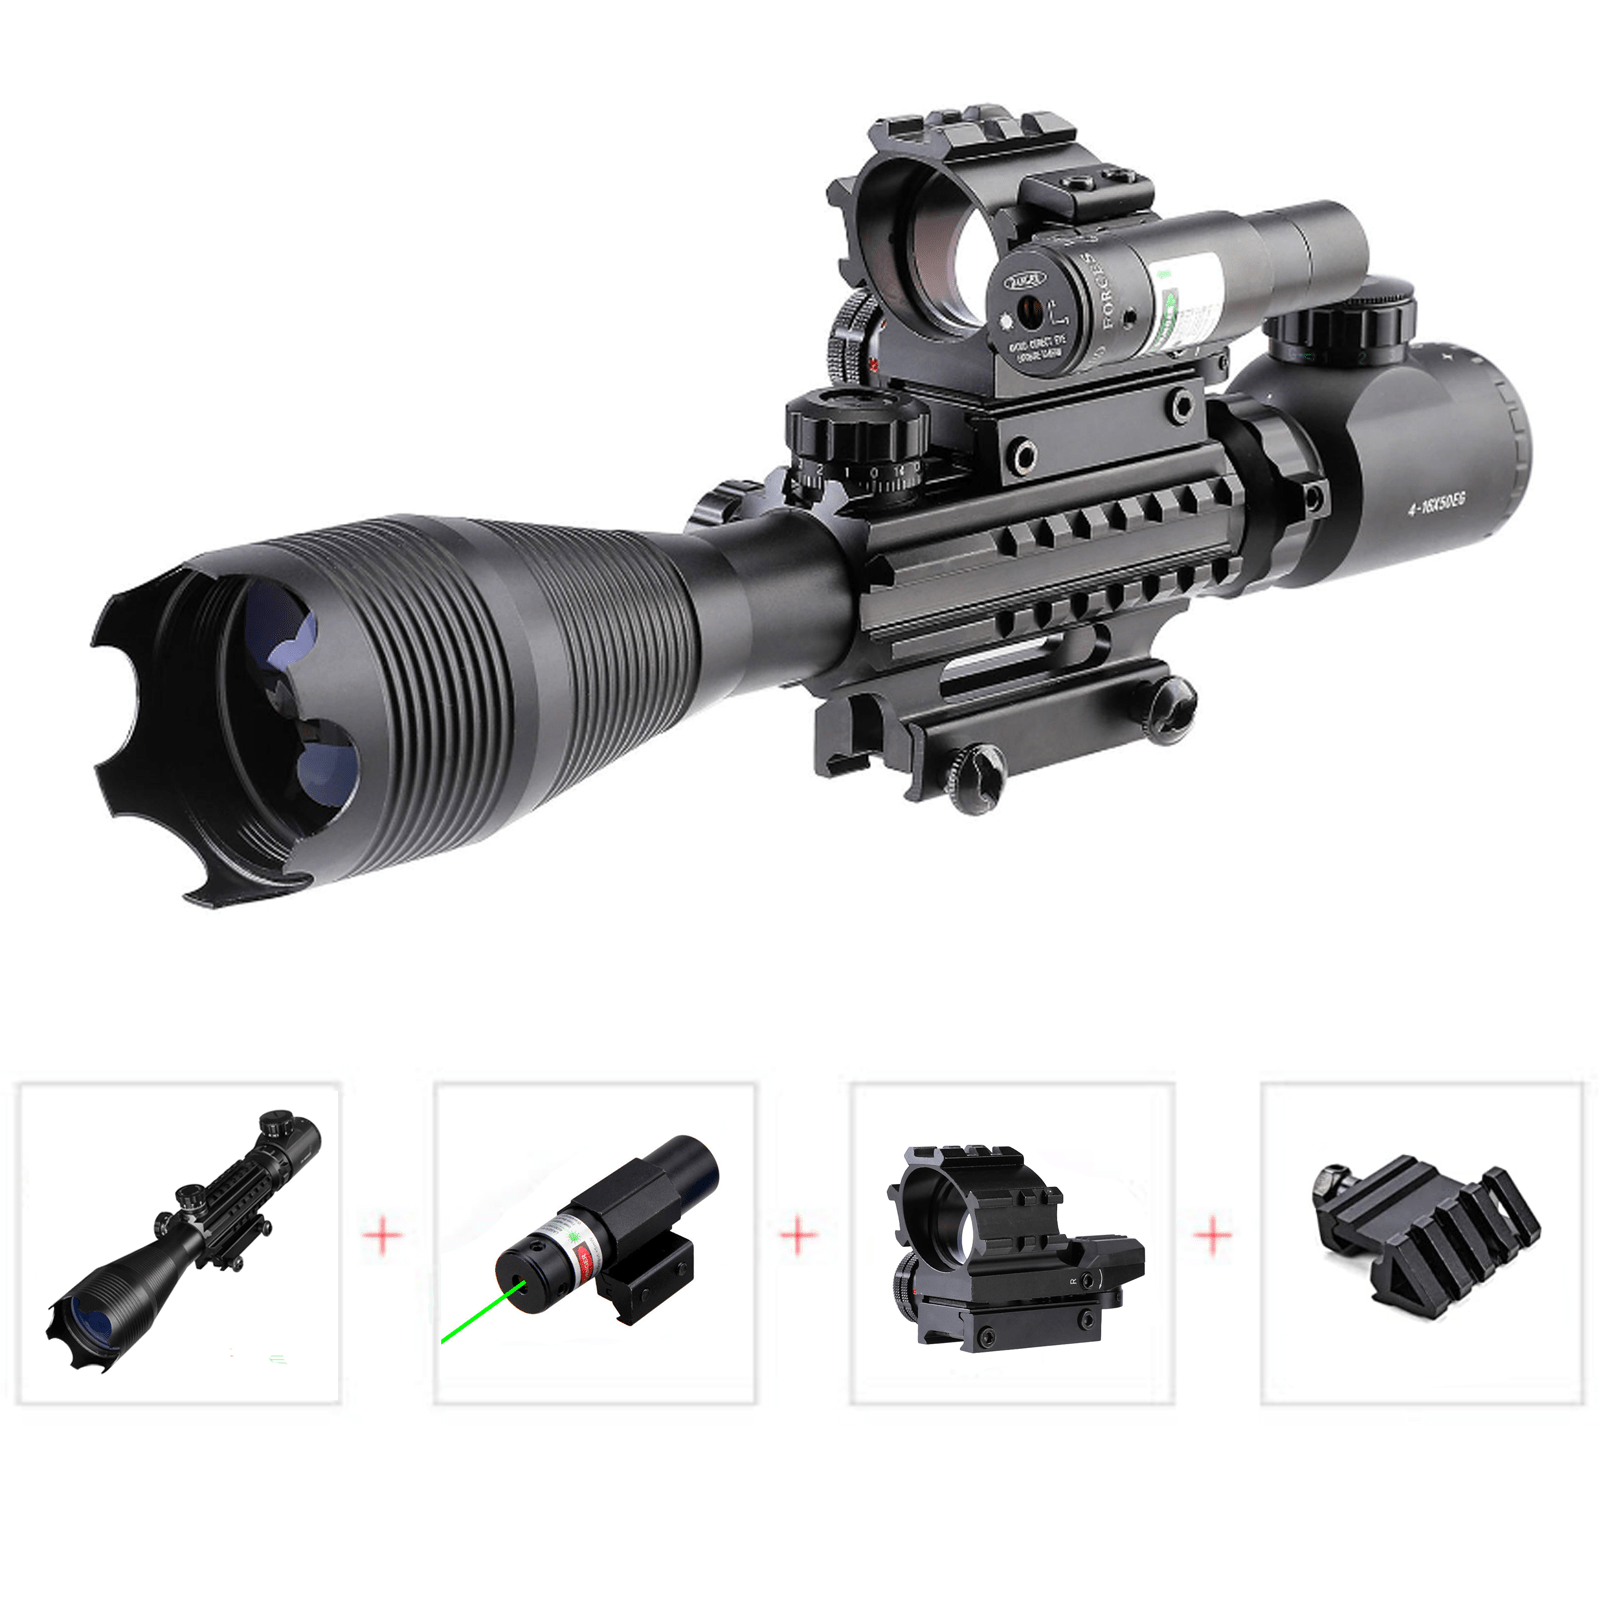 TAC-2: 4 Piece 4-16x50 Illuminated Reticle Scope Package